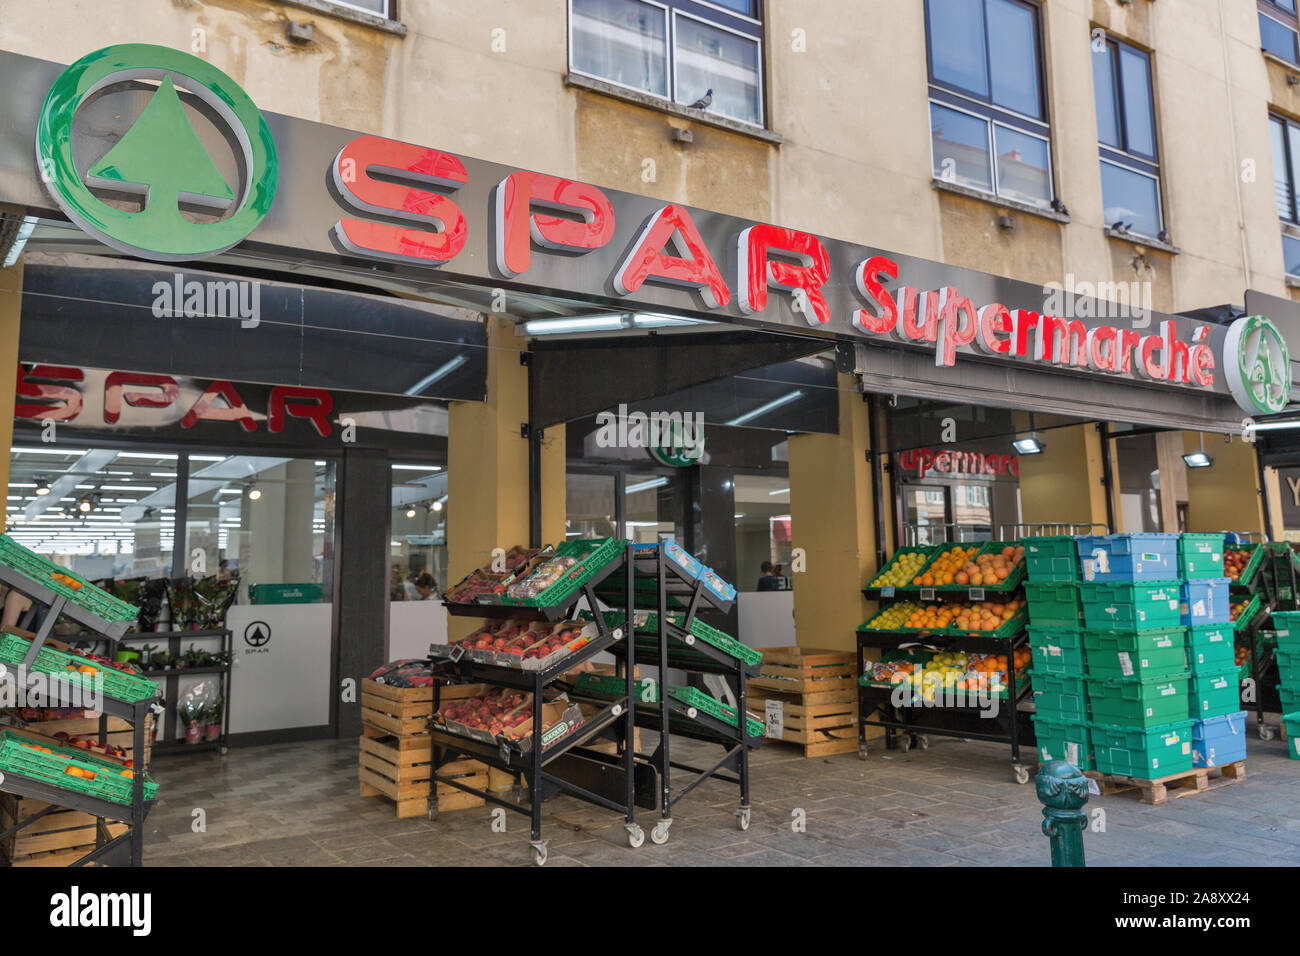 AJACCIO, CORSICA, FRANCE - JULY 13, 2019: SPAR supermarket exterior. SPAR is a Dutch multinational retail chain, operates as independent or franchise Stock Photo